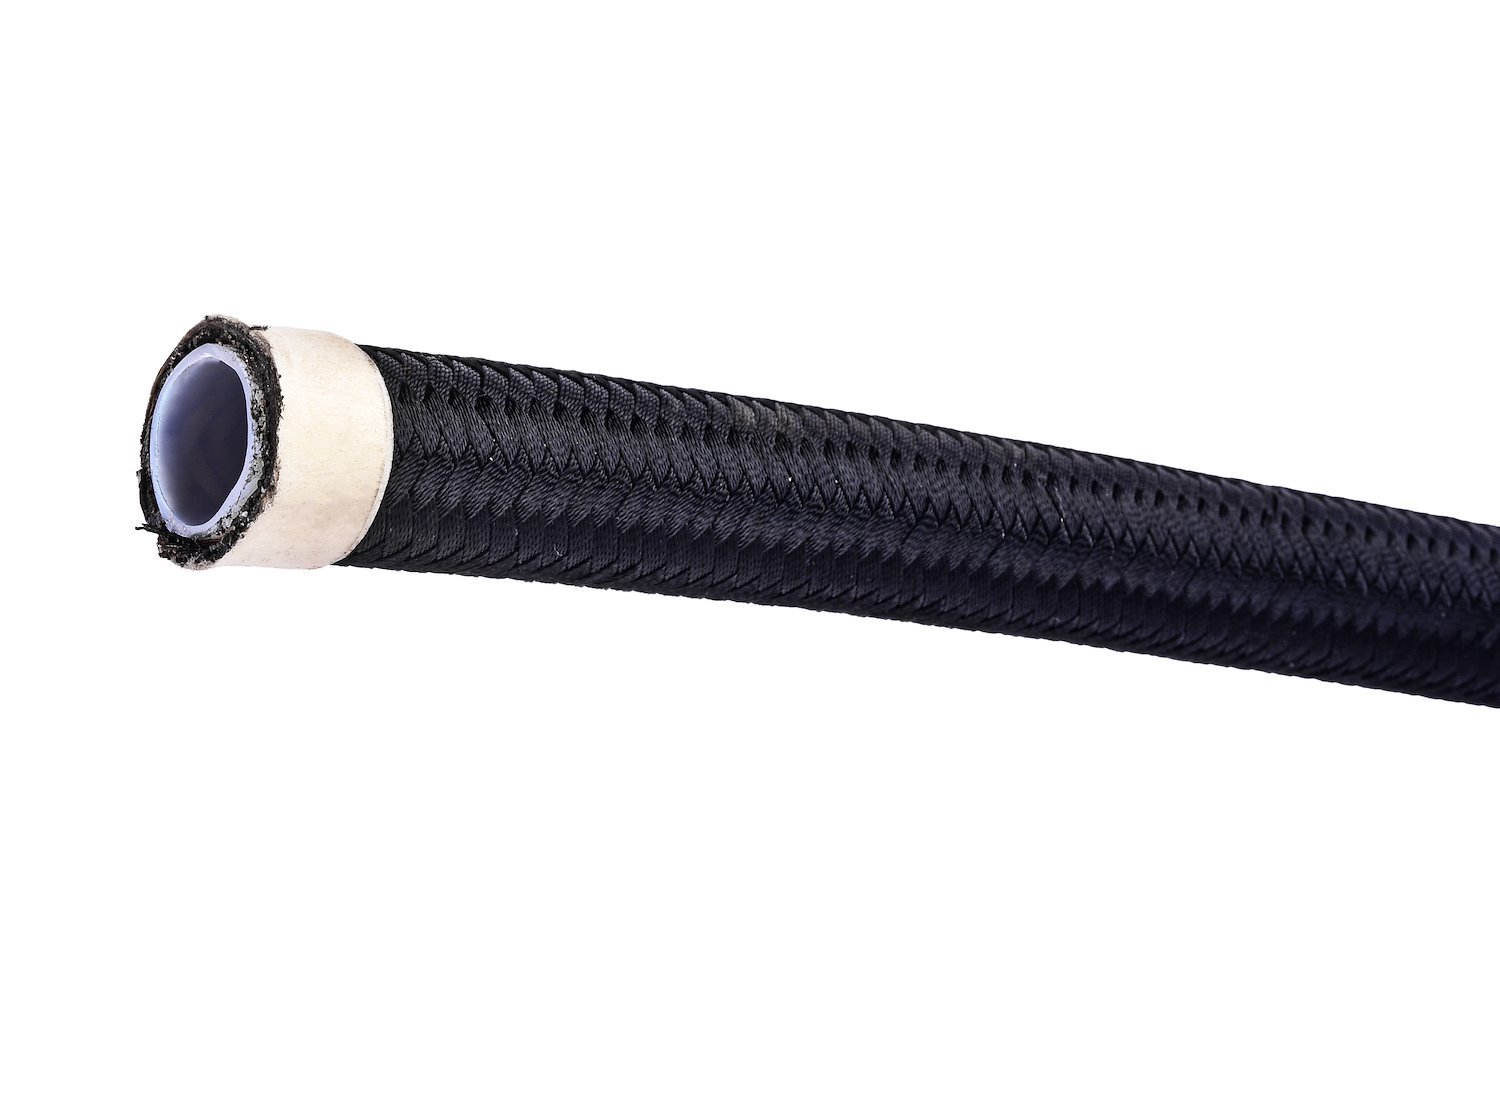 Oxygen Hose High Pressure 6000 PSI - Flexible Stainless Steel Braided Hose  2 ft.